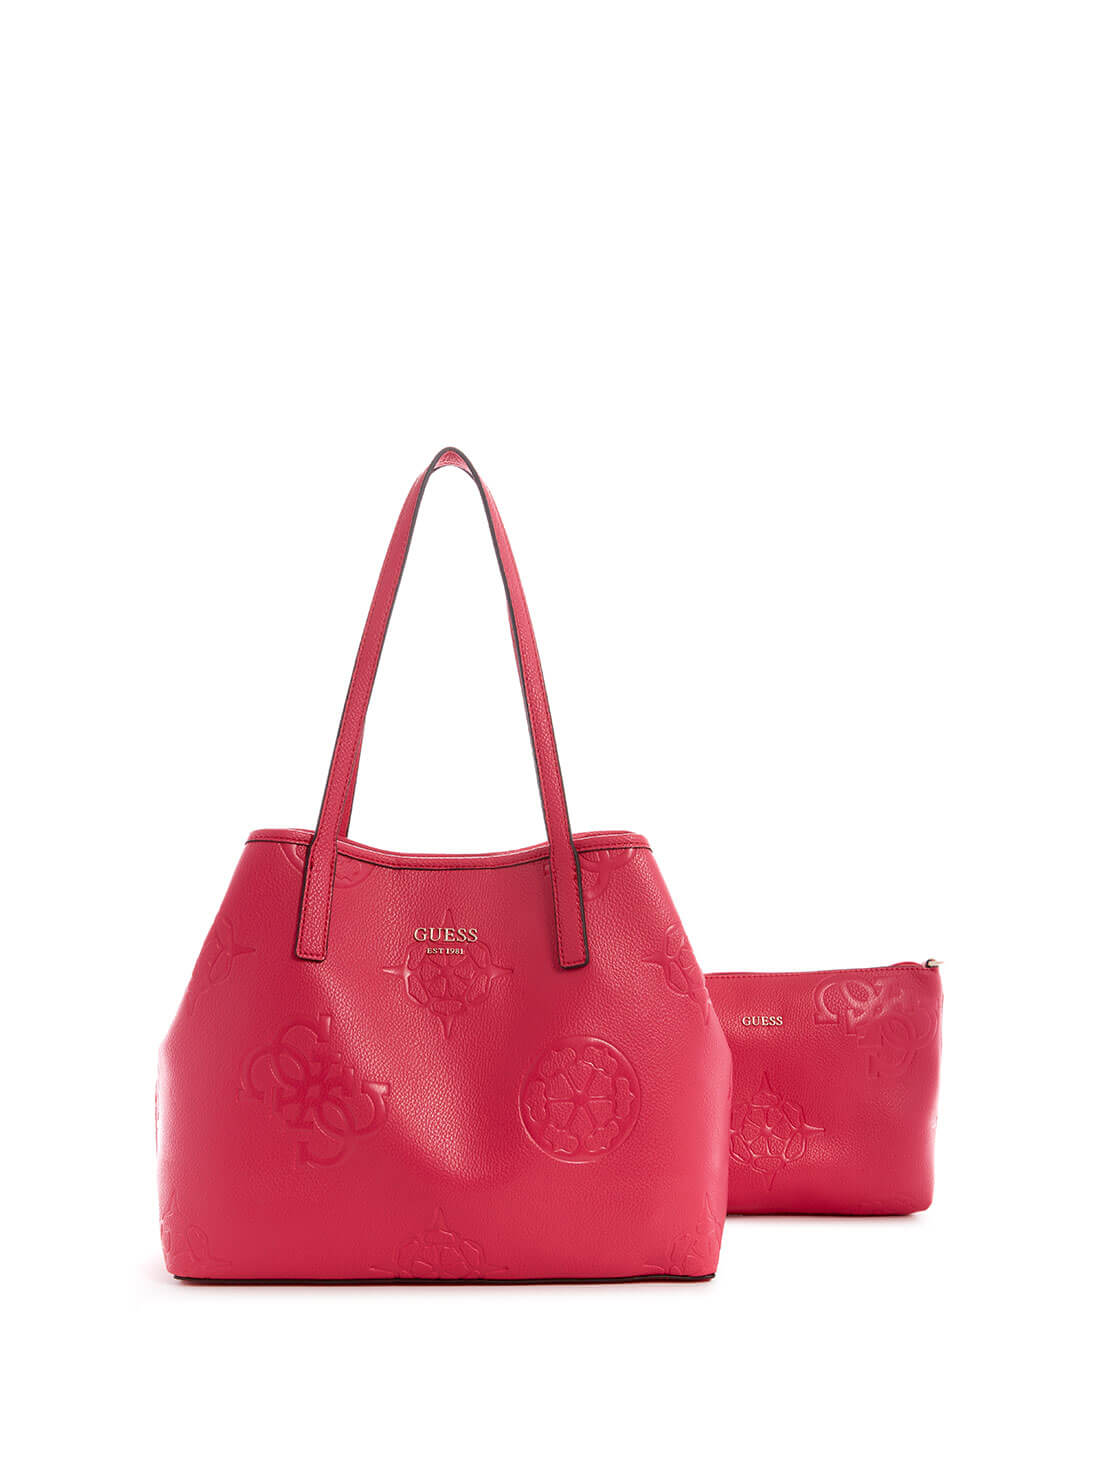 GUESS Women's Pink Vikky Tote Bag DP699523 Front Clutch View